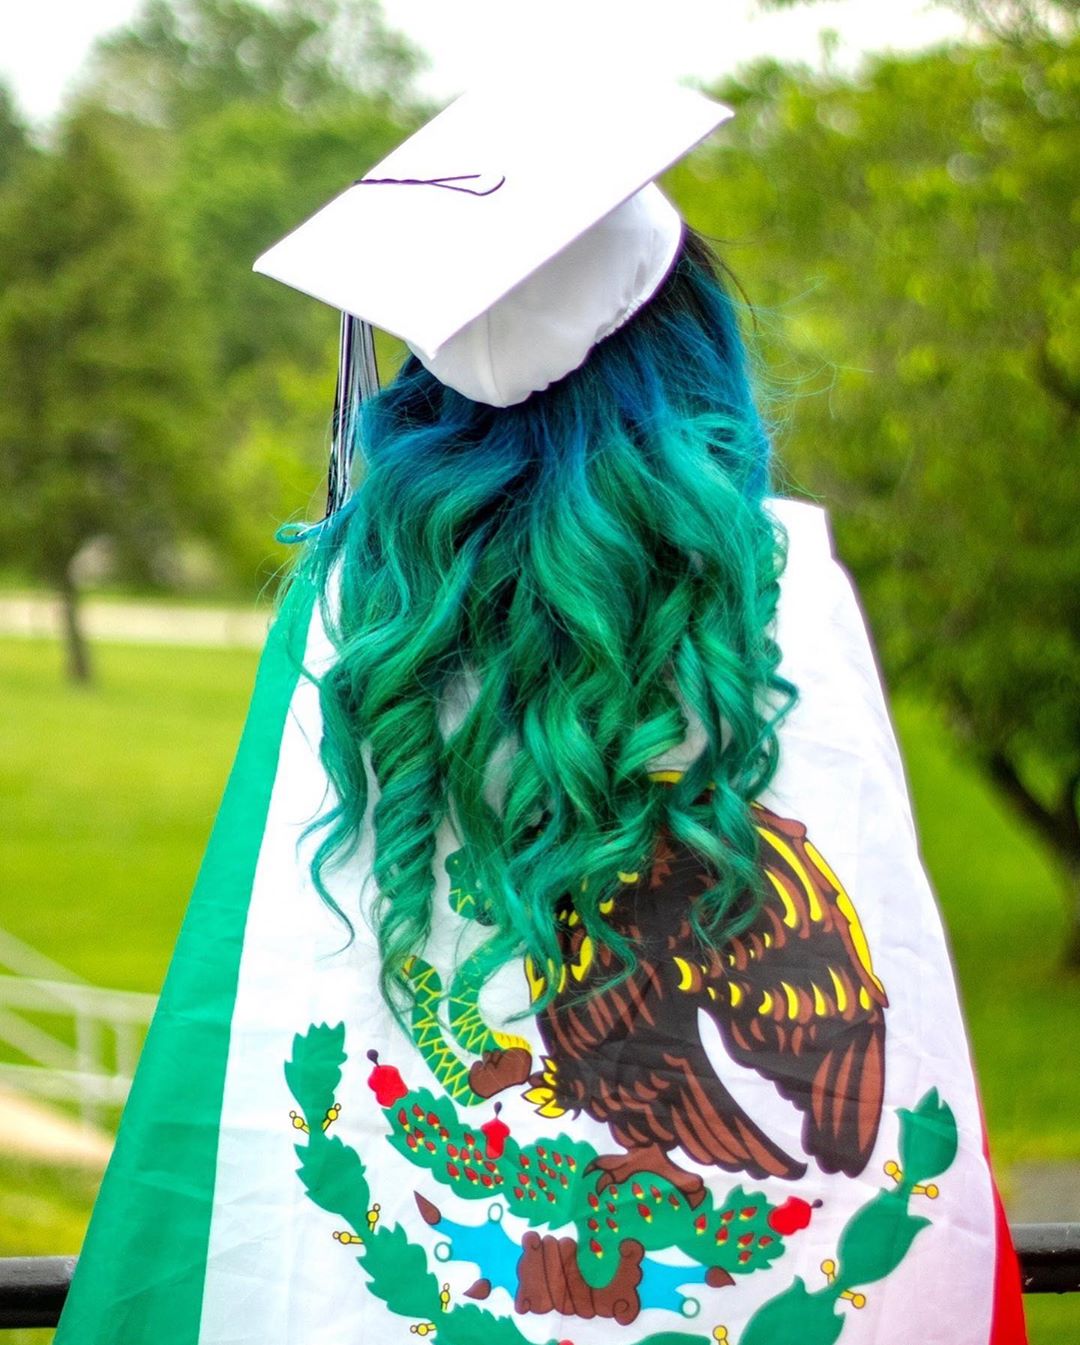 Matrix - ¡Viva México! 🇲🇽
We absolutely love this blue green ombre look @asotodoeshair created for her client’s graduation. Swipe to see her amazing color journey over the years➡️ 

Angela thank you s...